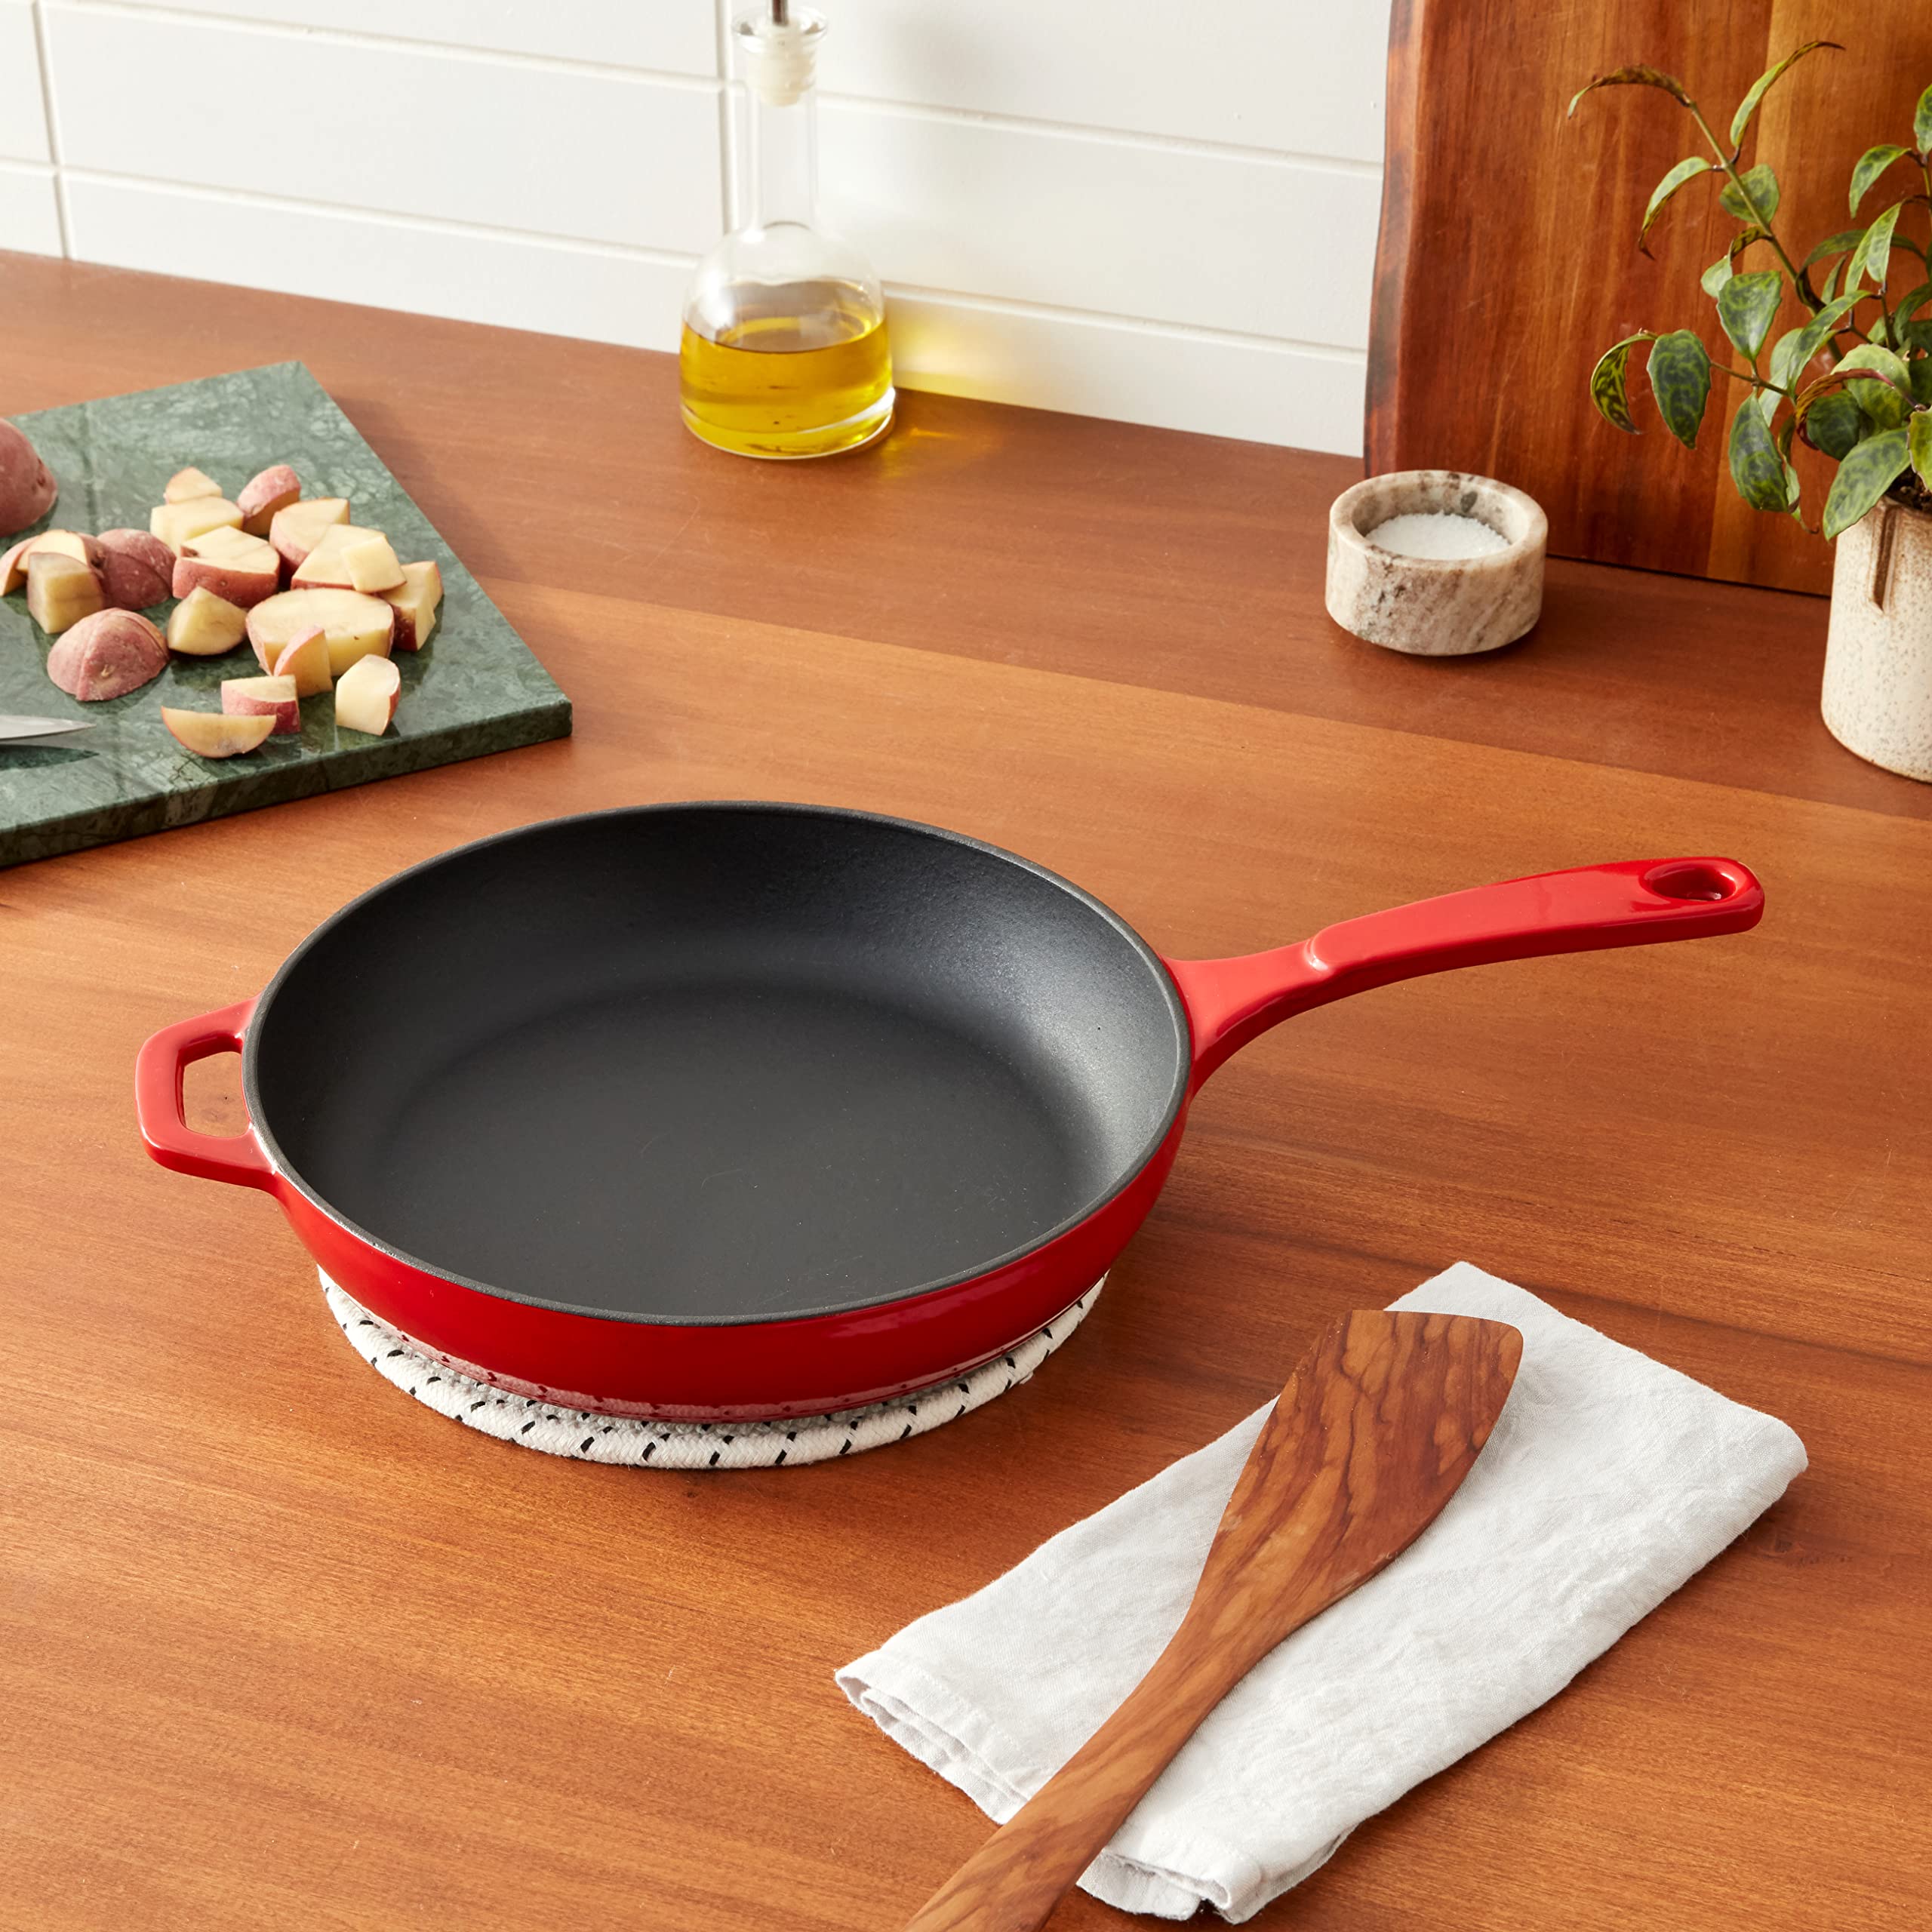 Lodge Color EC11S43 Enameled Cast Iron Skillet, Island Spice Red, 11-inch